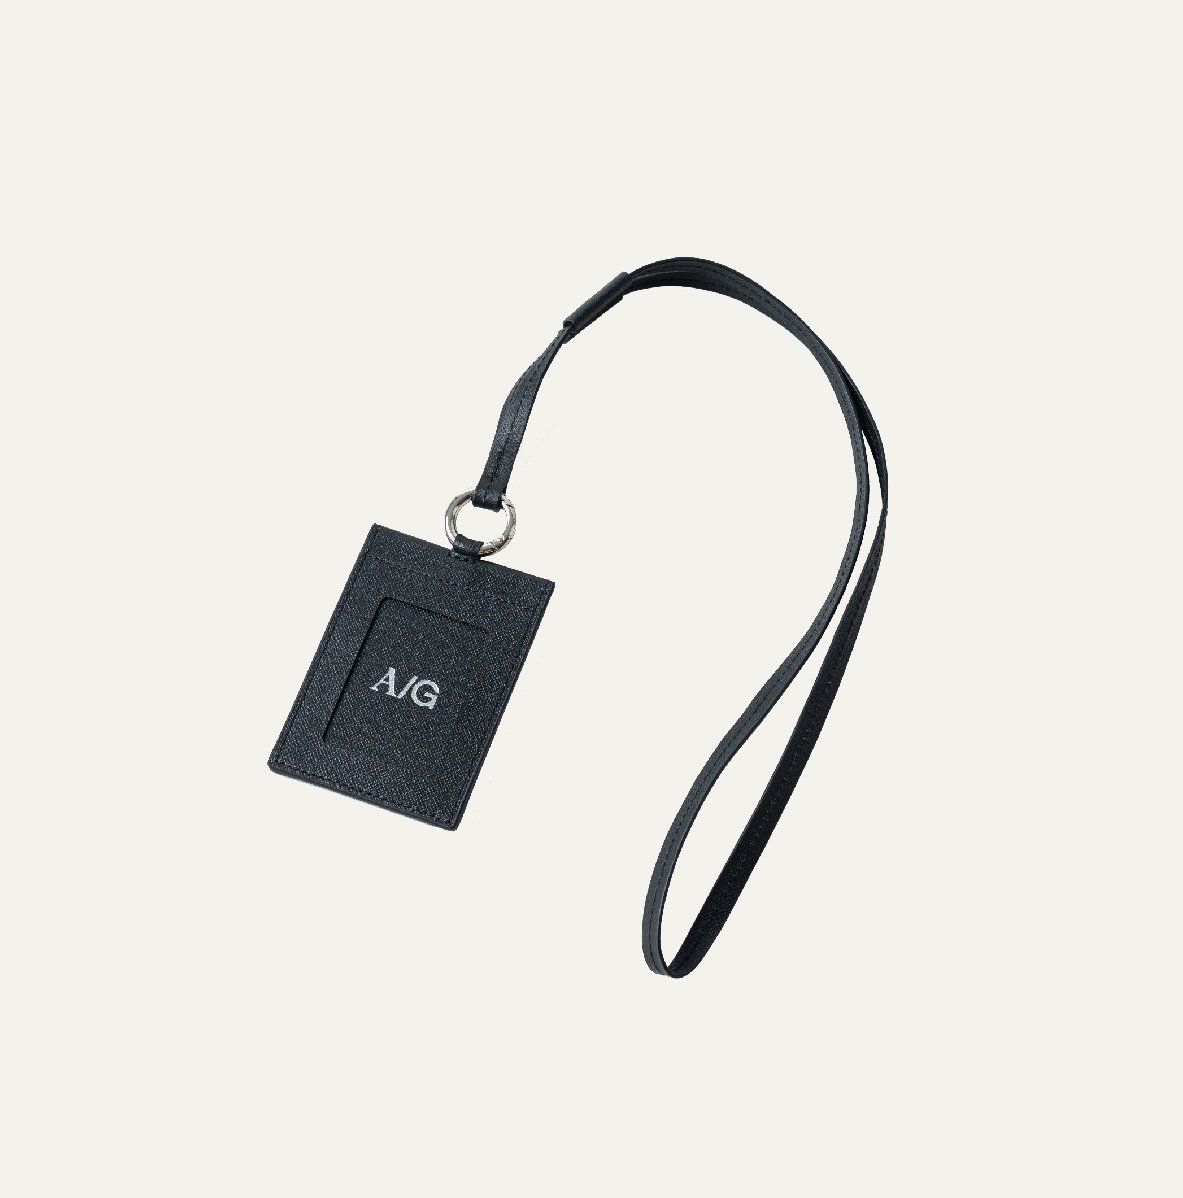  A/G DESIGN ID CARD HOLDER WITH NECK STRAP 